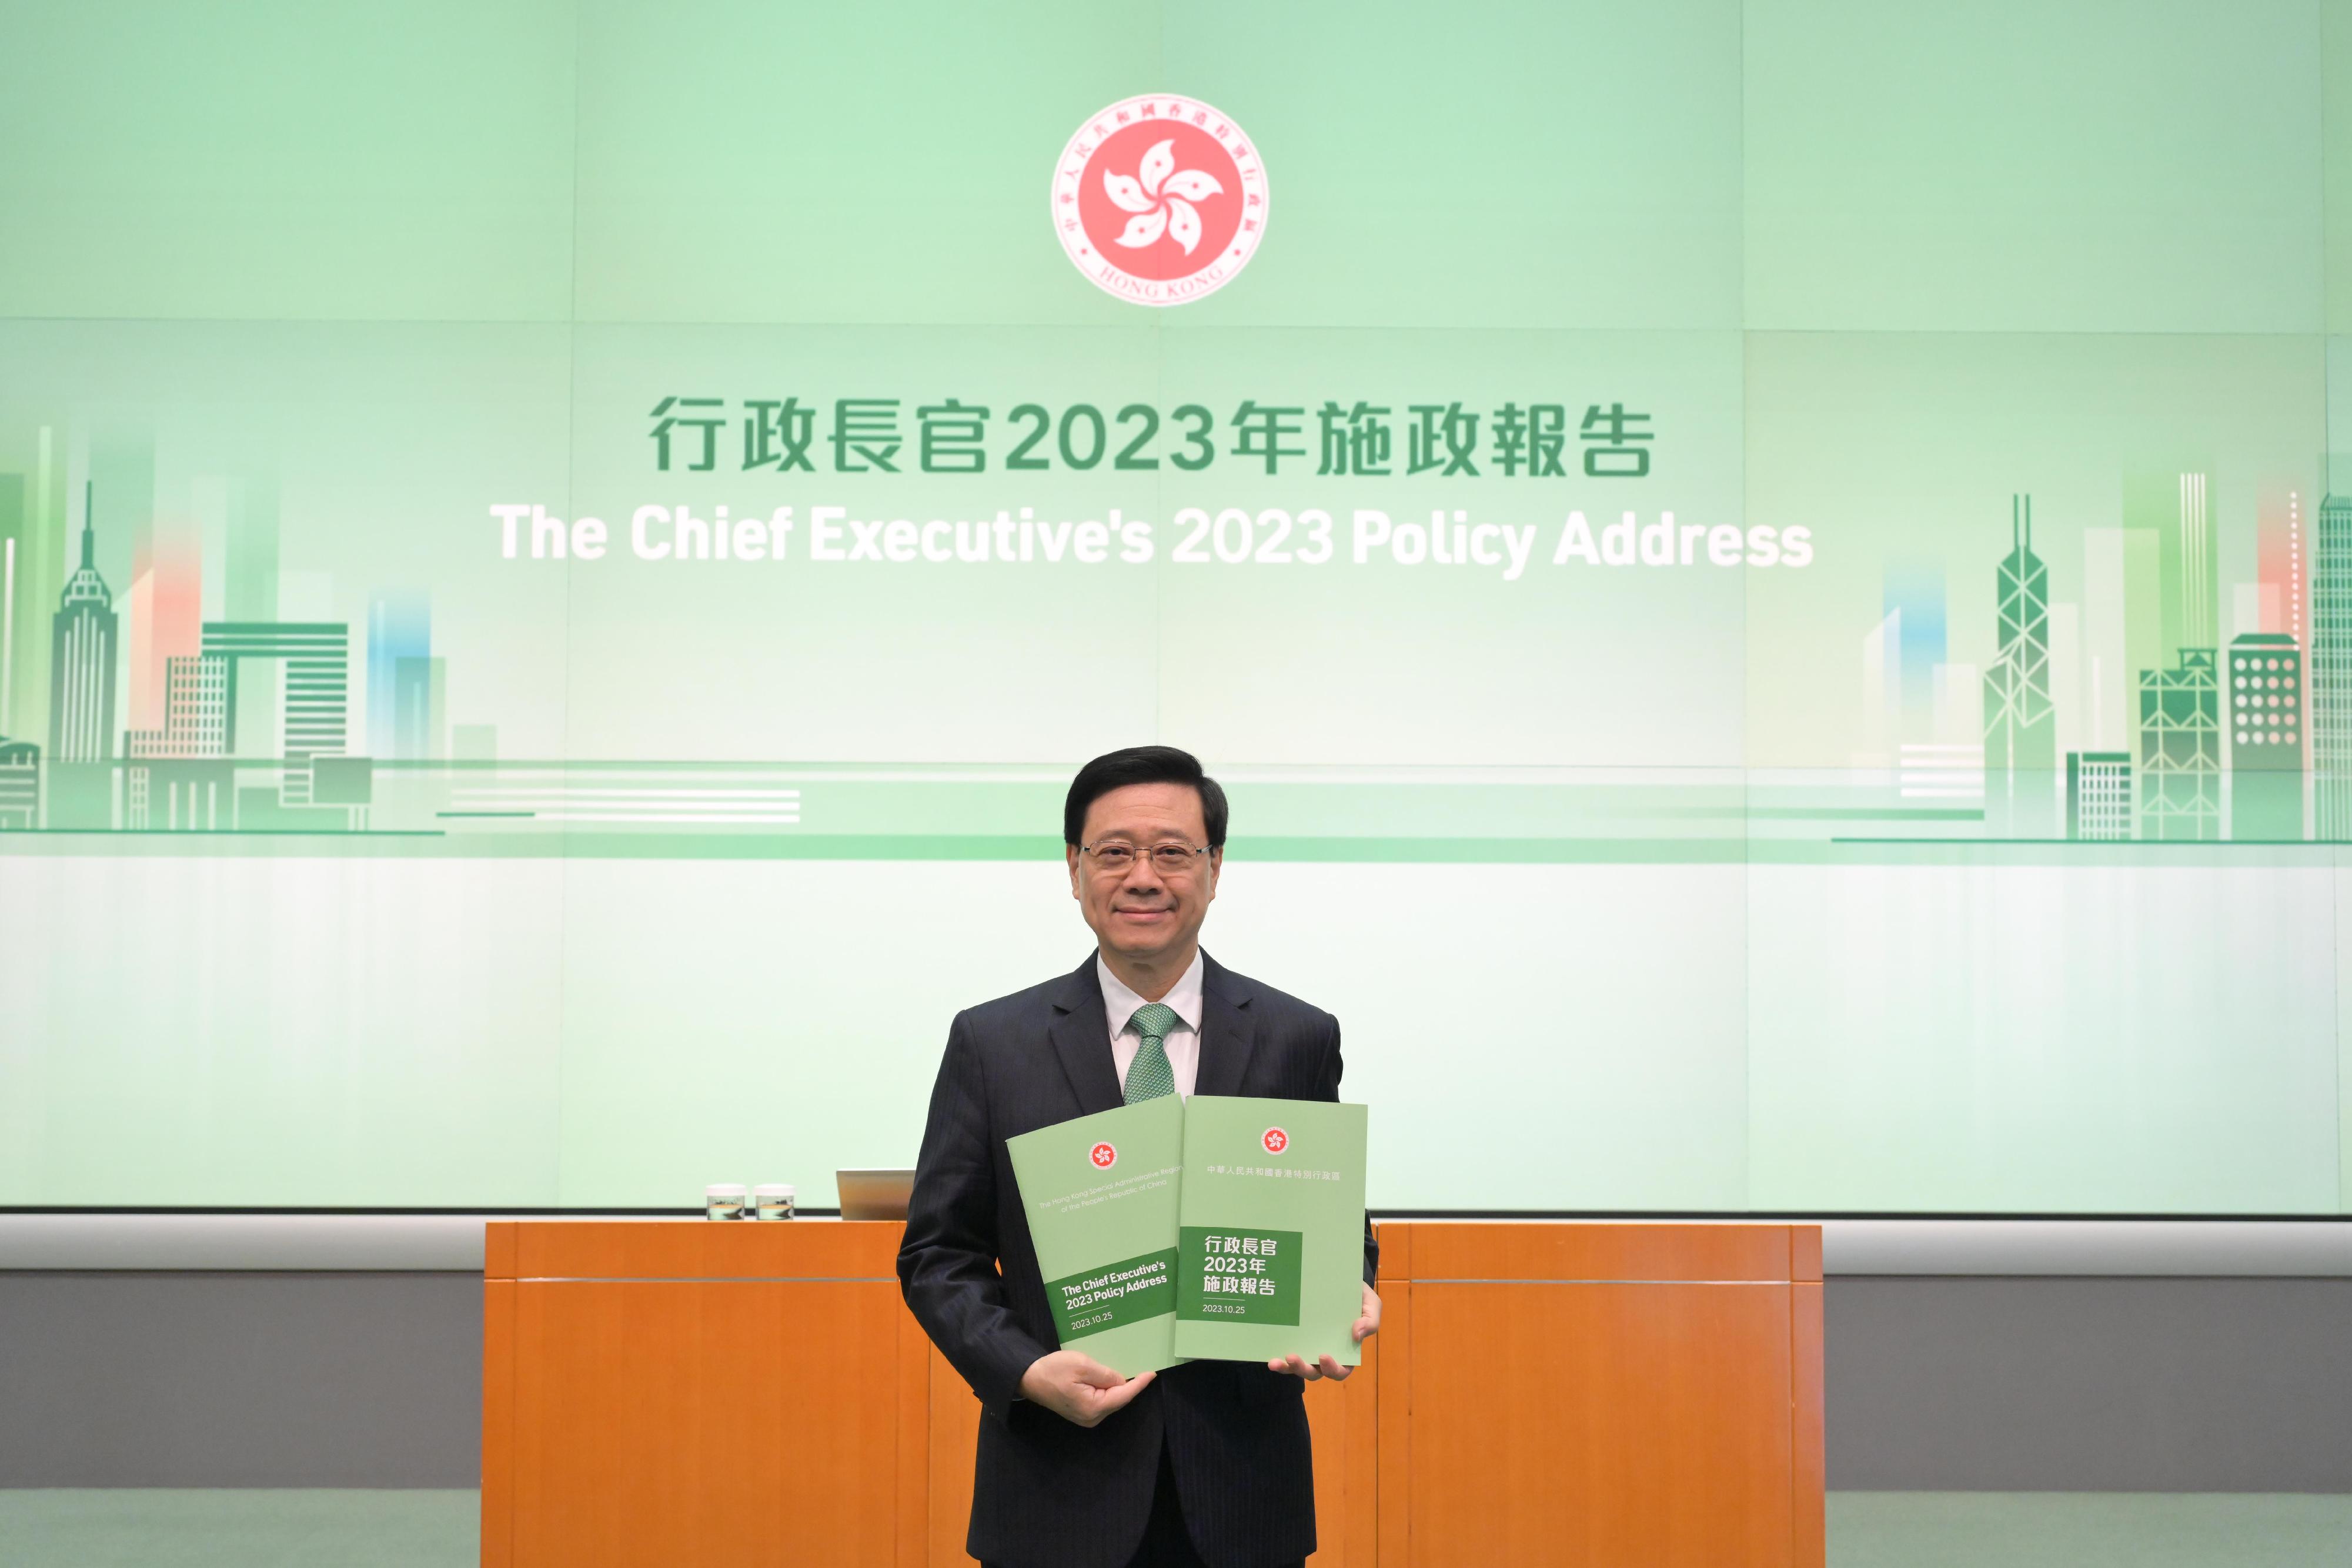 The Chief Executive, Mr John Lee, hosts a press conference on "The Chief Executive's 2023 Policy Address" this afternoon (October 25) at the Central Government Offices, Tamar.